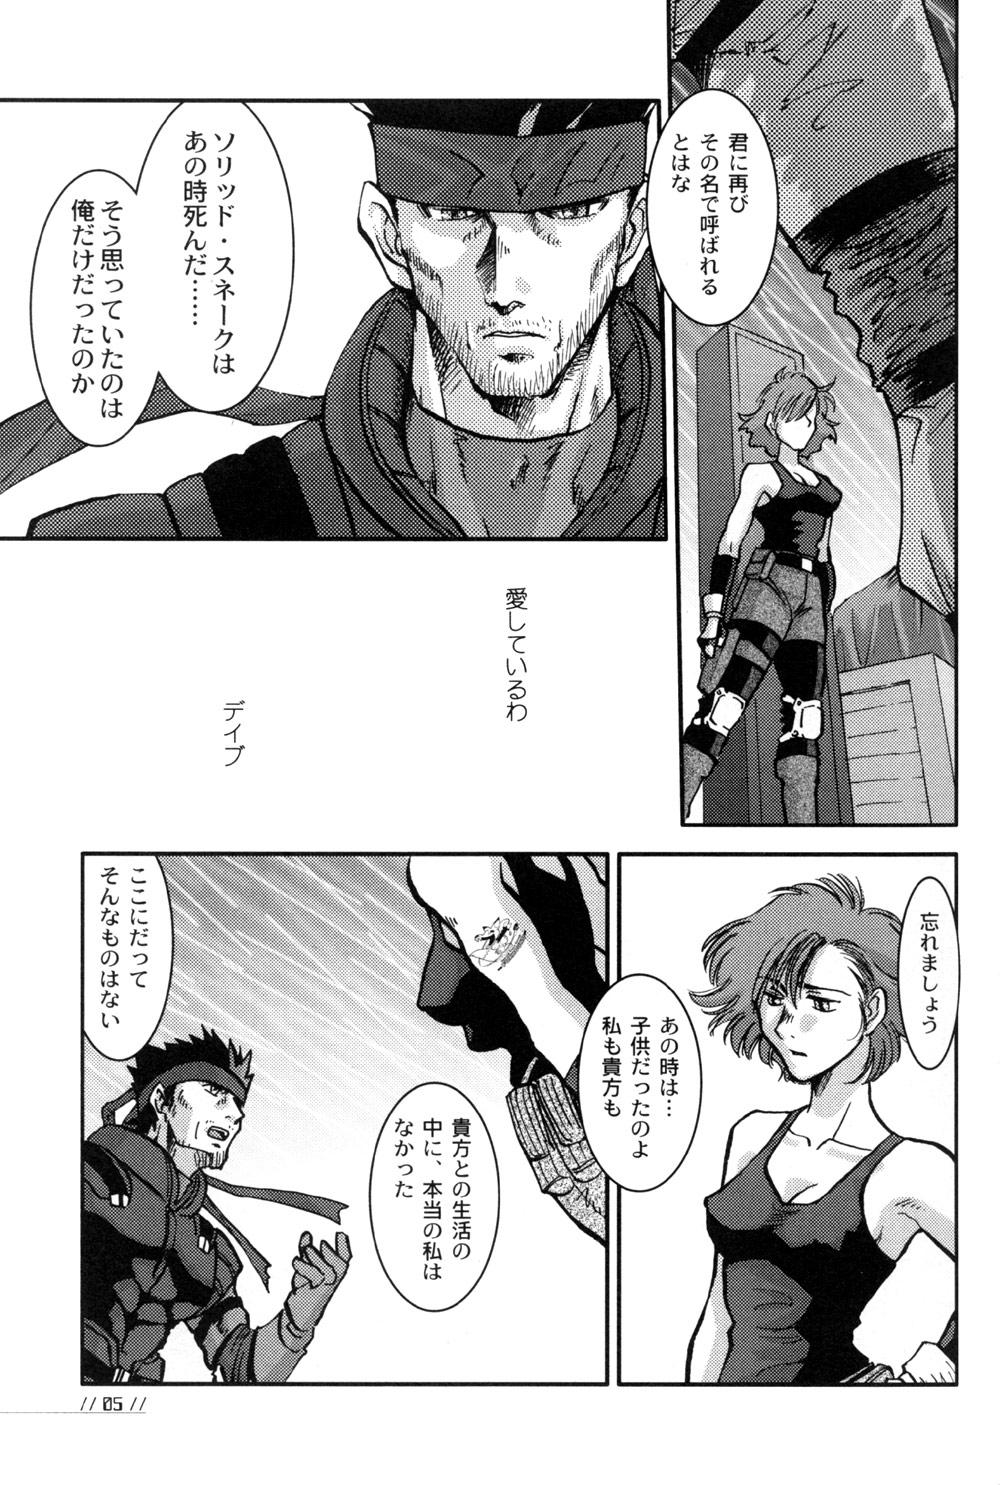 Taiwan Nomad - Metal gear solid Sexteen - Page 5